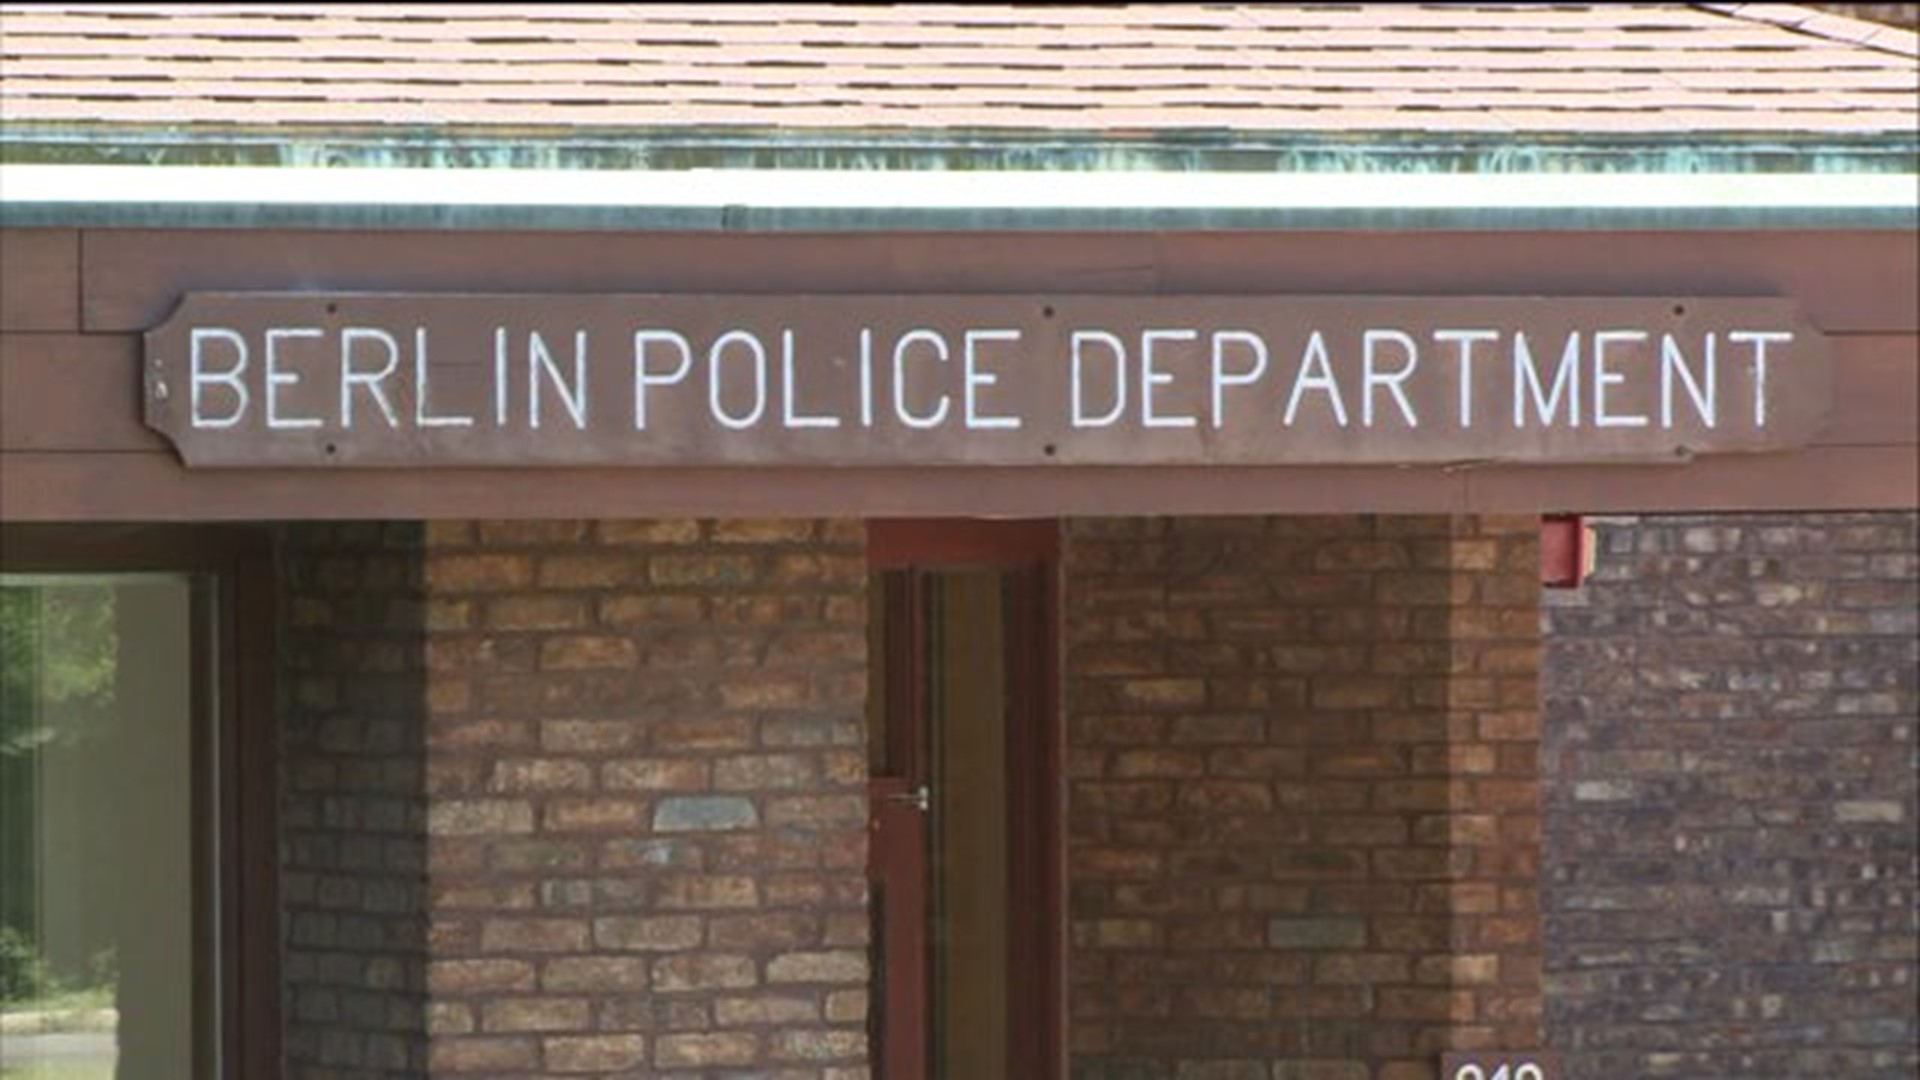 Residents Oppose Cost Of Berlin Police Department Move To Bigger Space